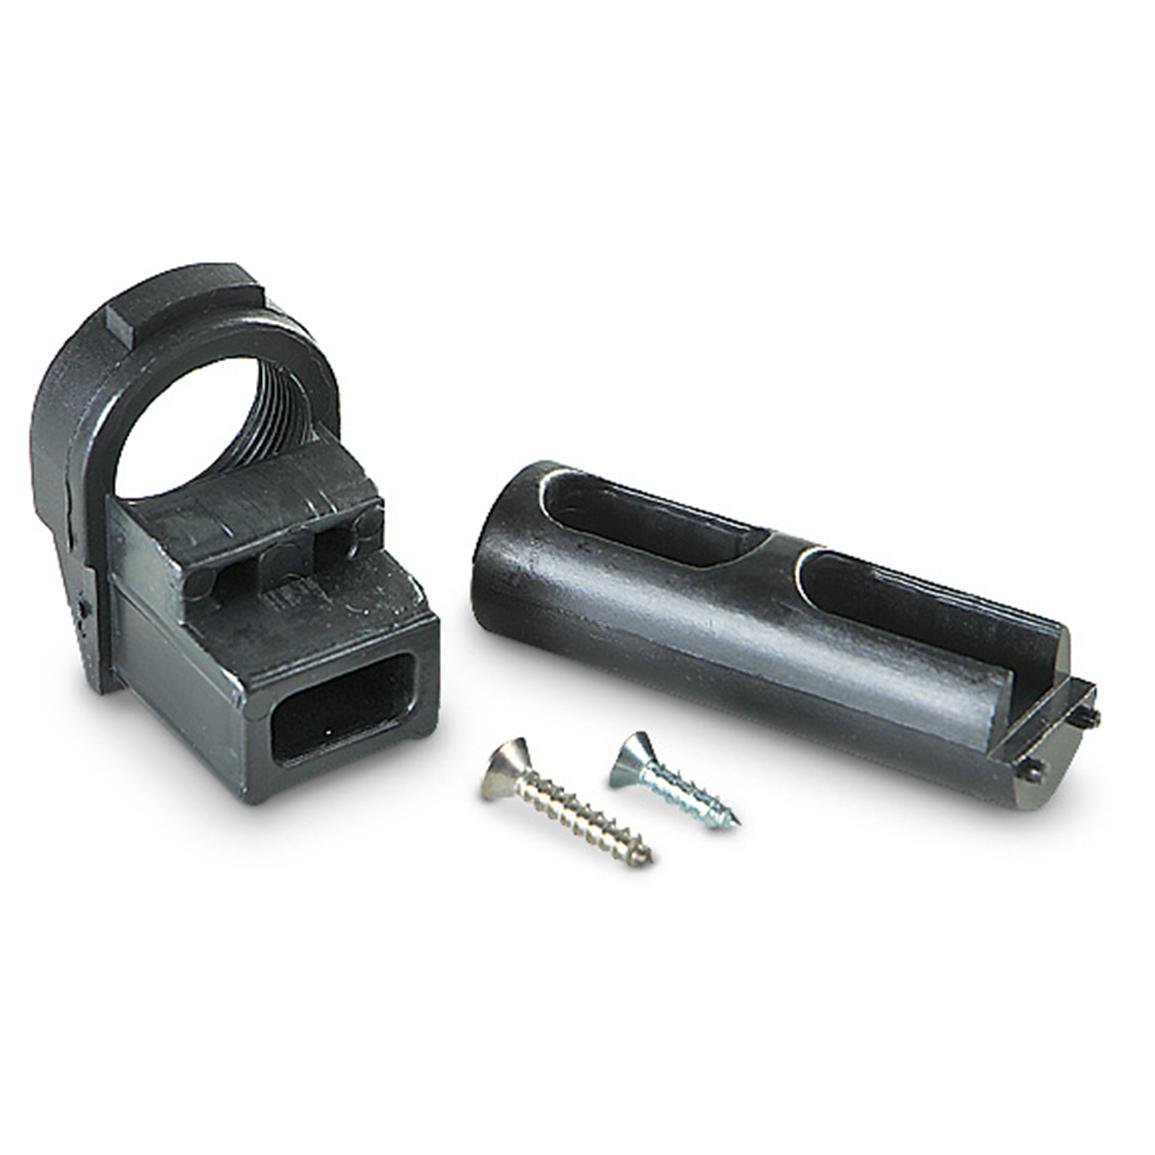 AR-15 to AK-47 Stock Adapter